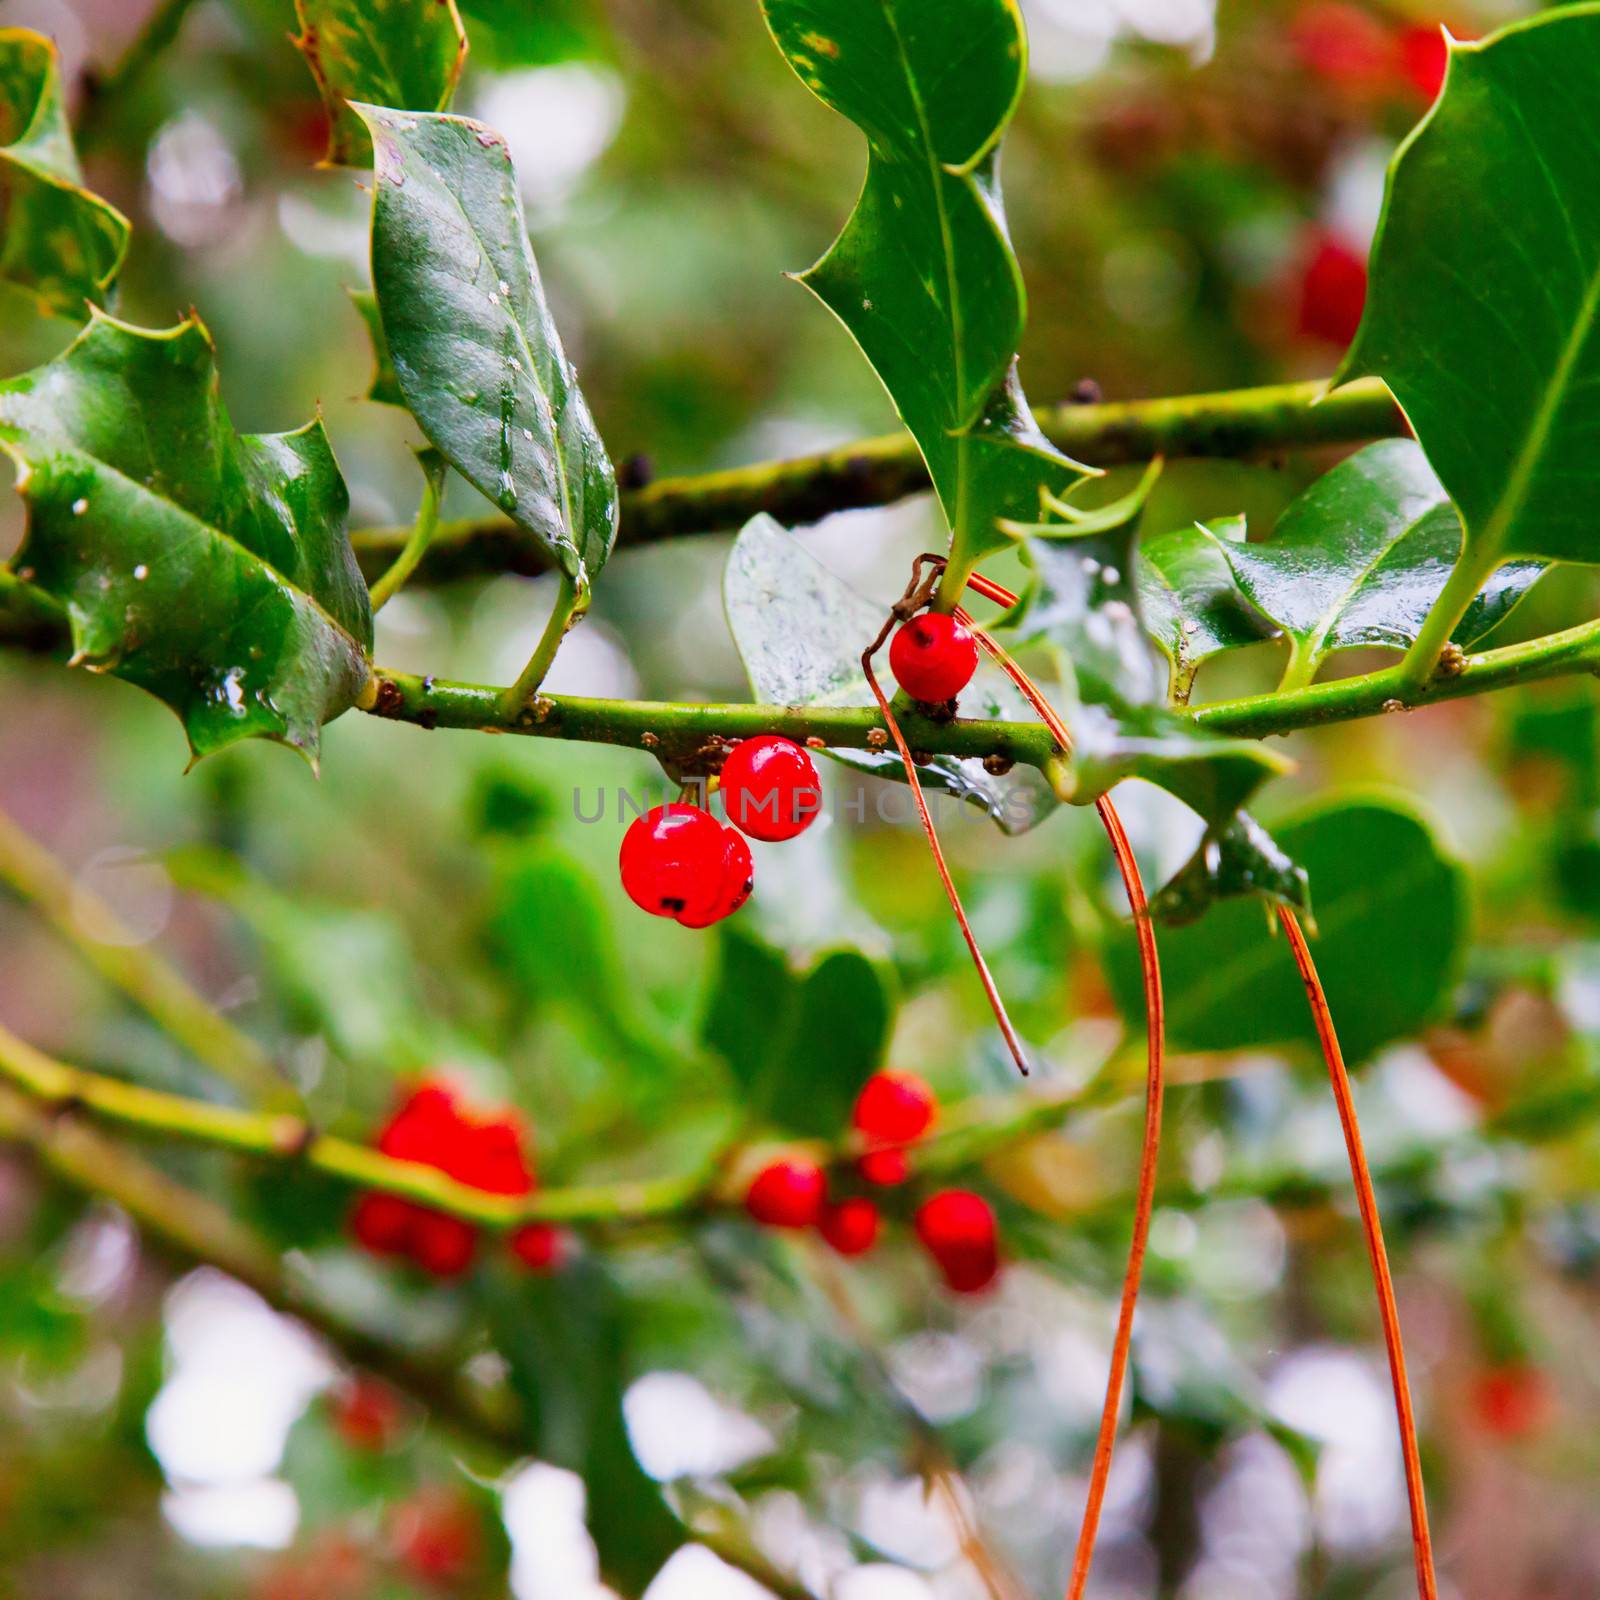 Red berries of holly on a plant in closeup